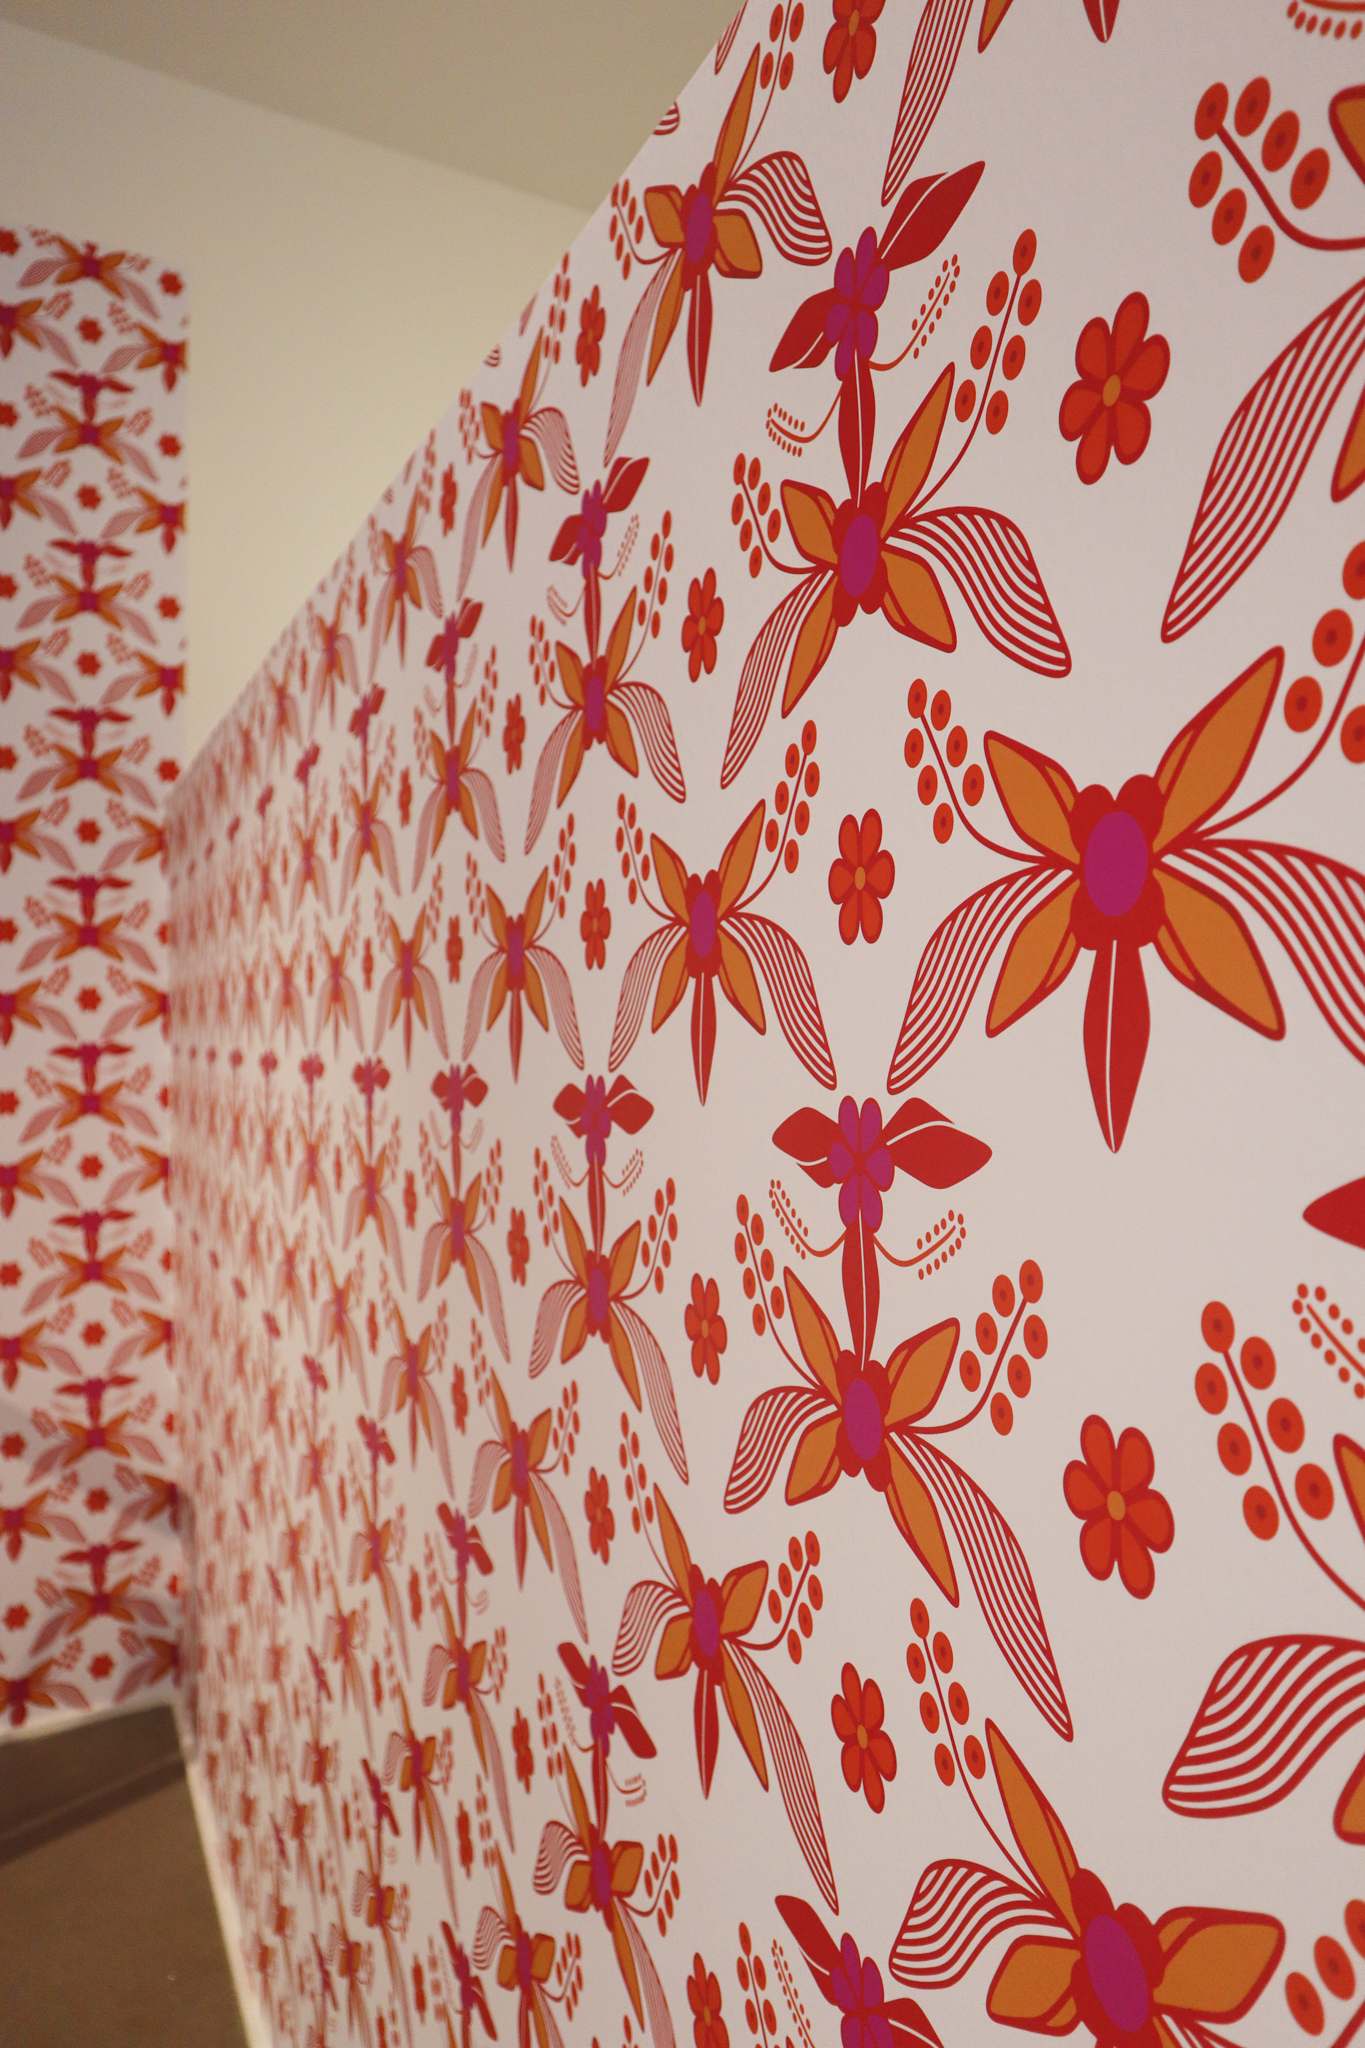 Colorful wallpaper sprawls across a white wall. Looking at an angle, we can see bright pink, red and orange patterns of what looks like a butterfly/flower creature, replicated over and over again.